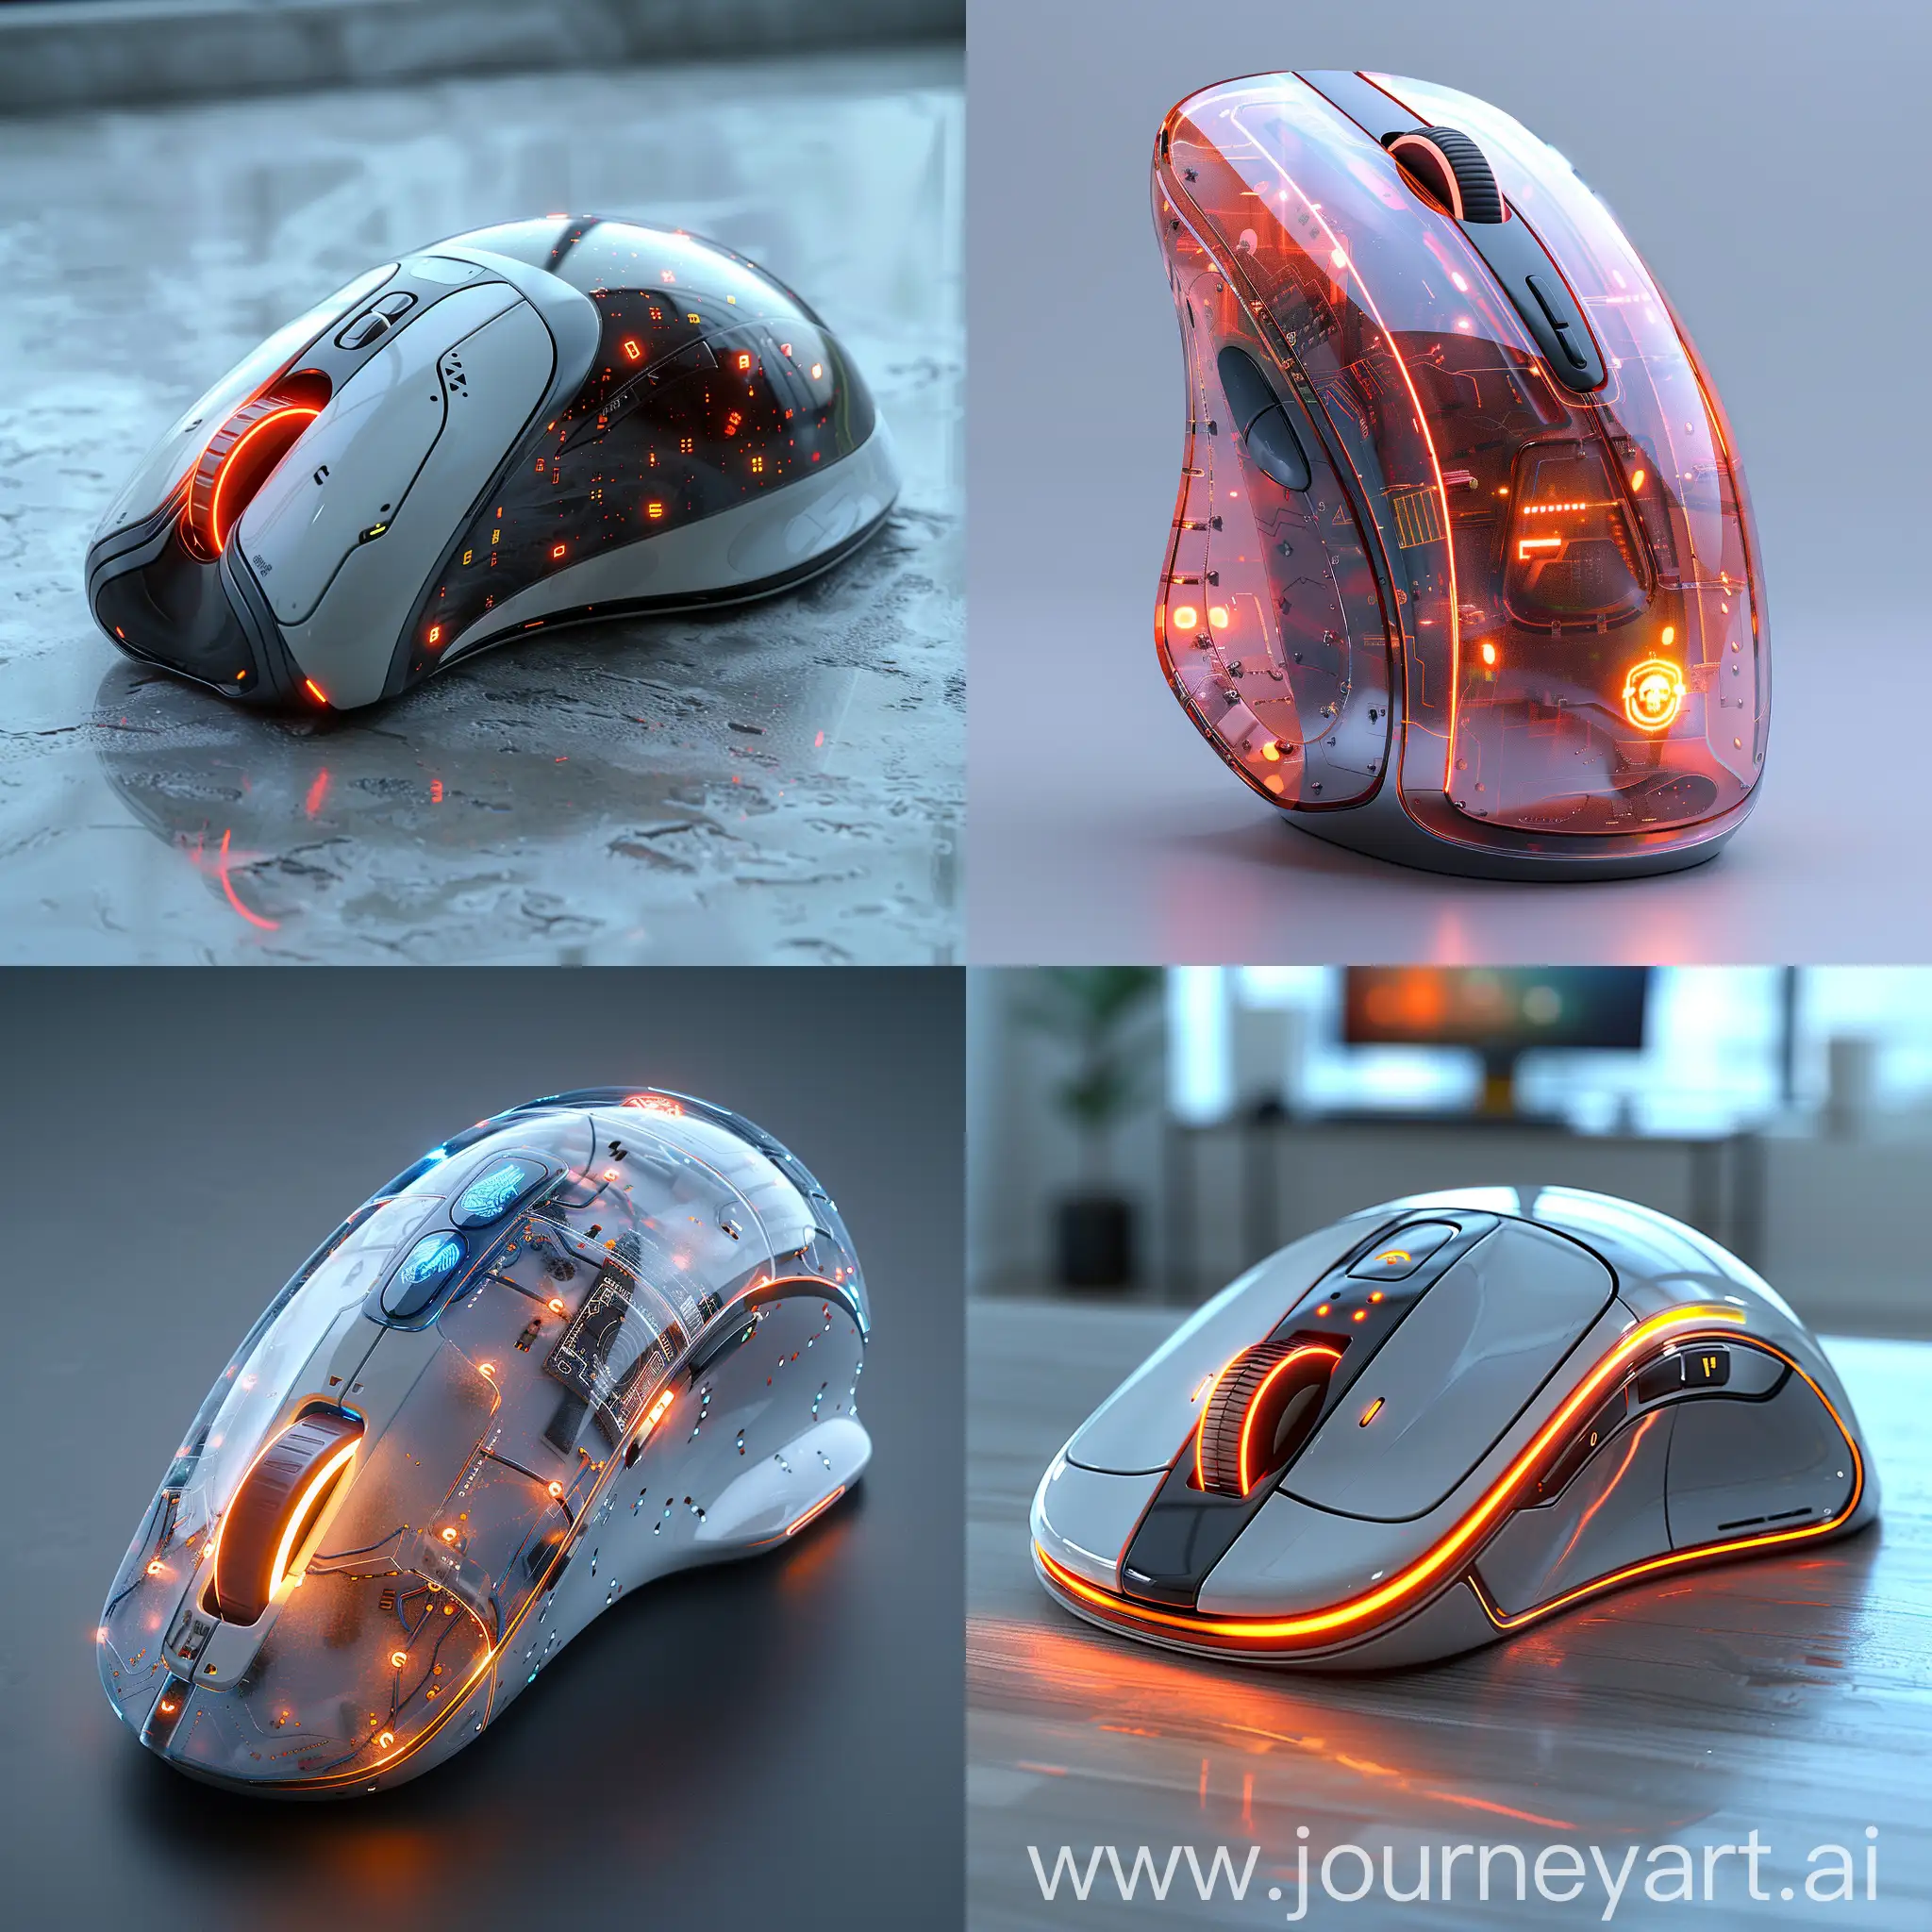 Futurisic PC mouse, Holographic Display, Biometric Sensor, Gesture Recognition, Wireless Charging, AI Integration, Virtual Reality Control, Health Monitoring, Voice Control, Customizable Ergonomics, Customizable Ergonomics, Sleek Ergonomic Design, Premium Materials, RGB Lighting, Transparent Casing, Touch-Sensitive Surface, Magnetic Charging Dock, Minimalistic Buttons, Aerodynamic Shape, Modular Components, Artificial Intelligence Design, octane render --stylize 1000